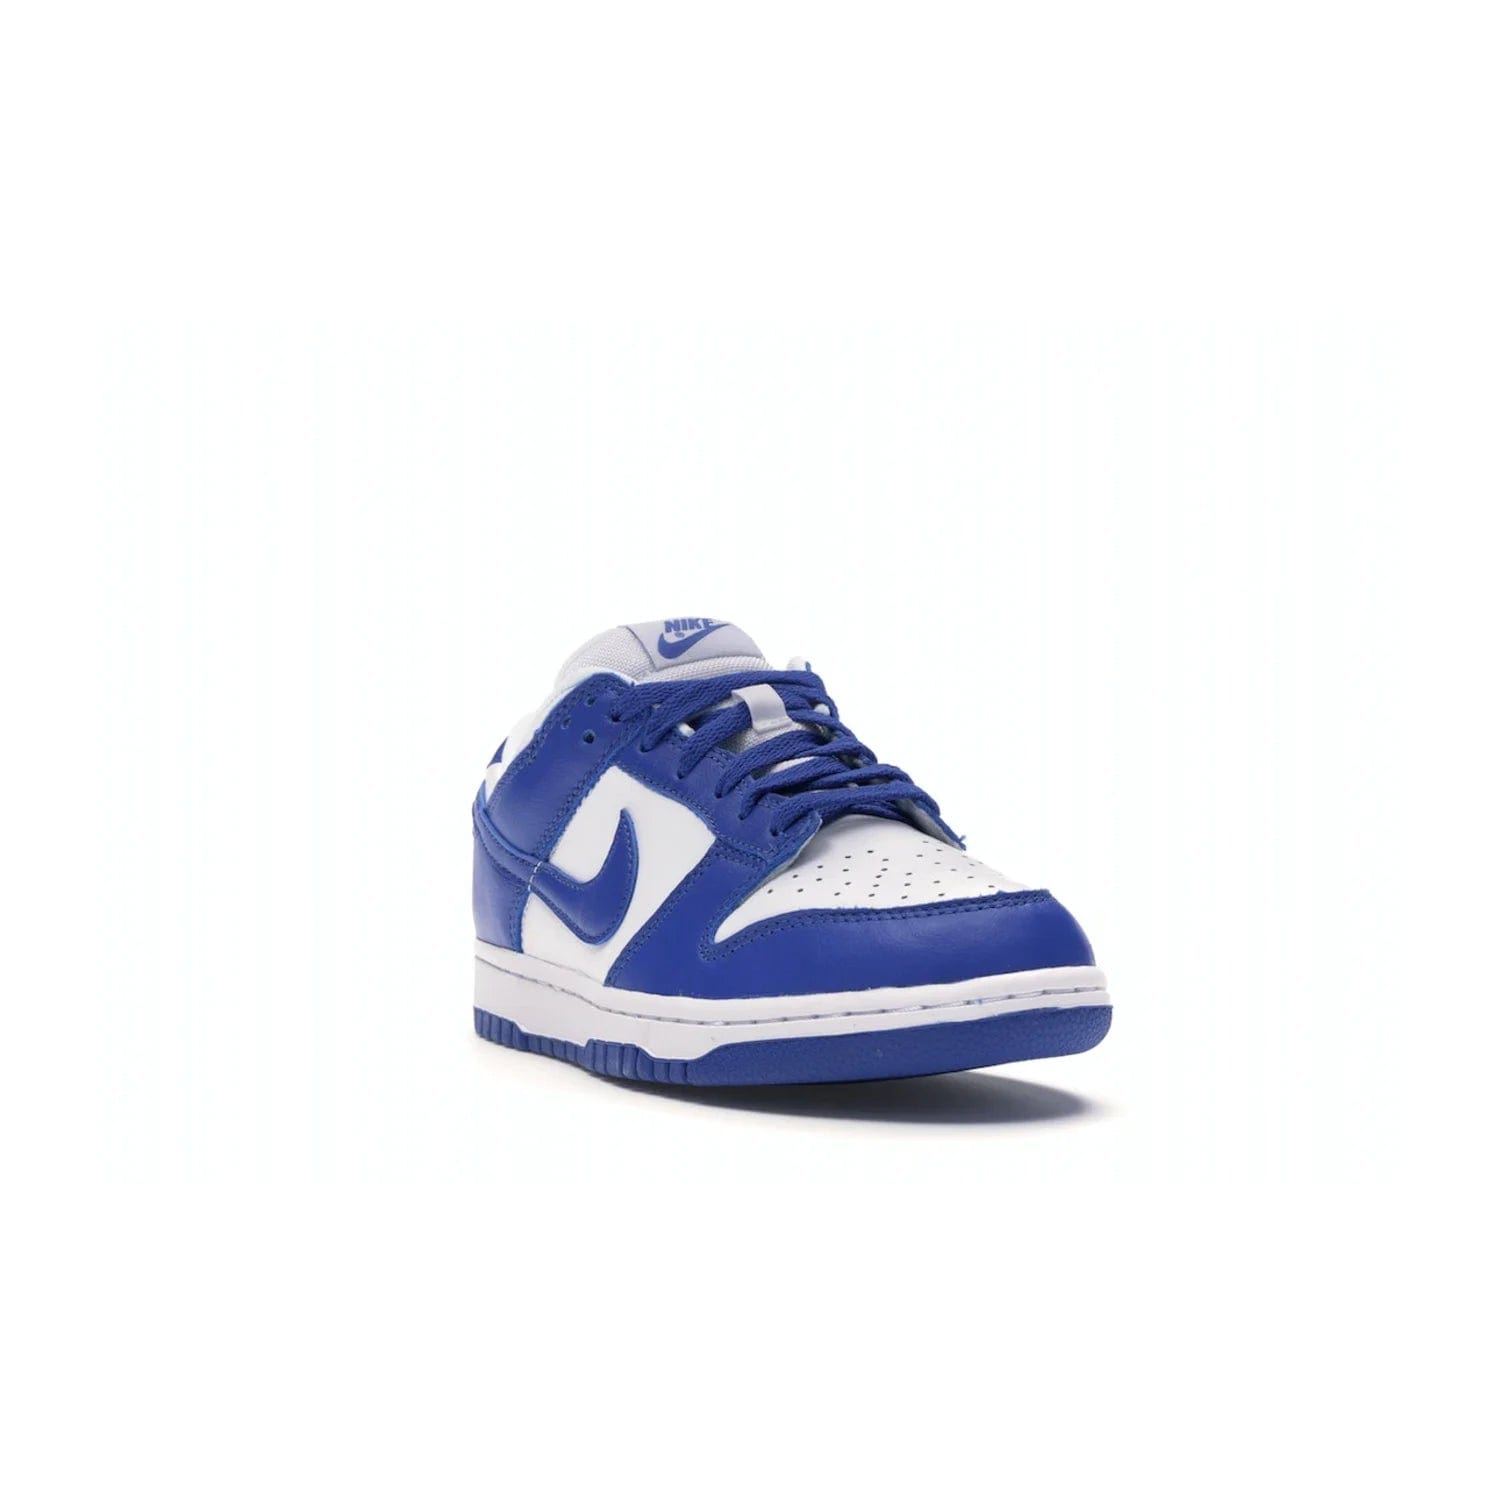 Nike Dunk Low SP Kentucky (2020/2022) - Image 7 - Only at www.BallersClubKickz.com - Classic Nike Dunk Low SP Kentucky with timeless White/Varsity Royal colorway. White leather upper, royal outsole, and Nike branding. A hit since March 2020 homage to the 1985 Nike College Colors program. Show your support with these classic kicks.